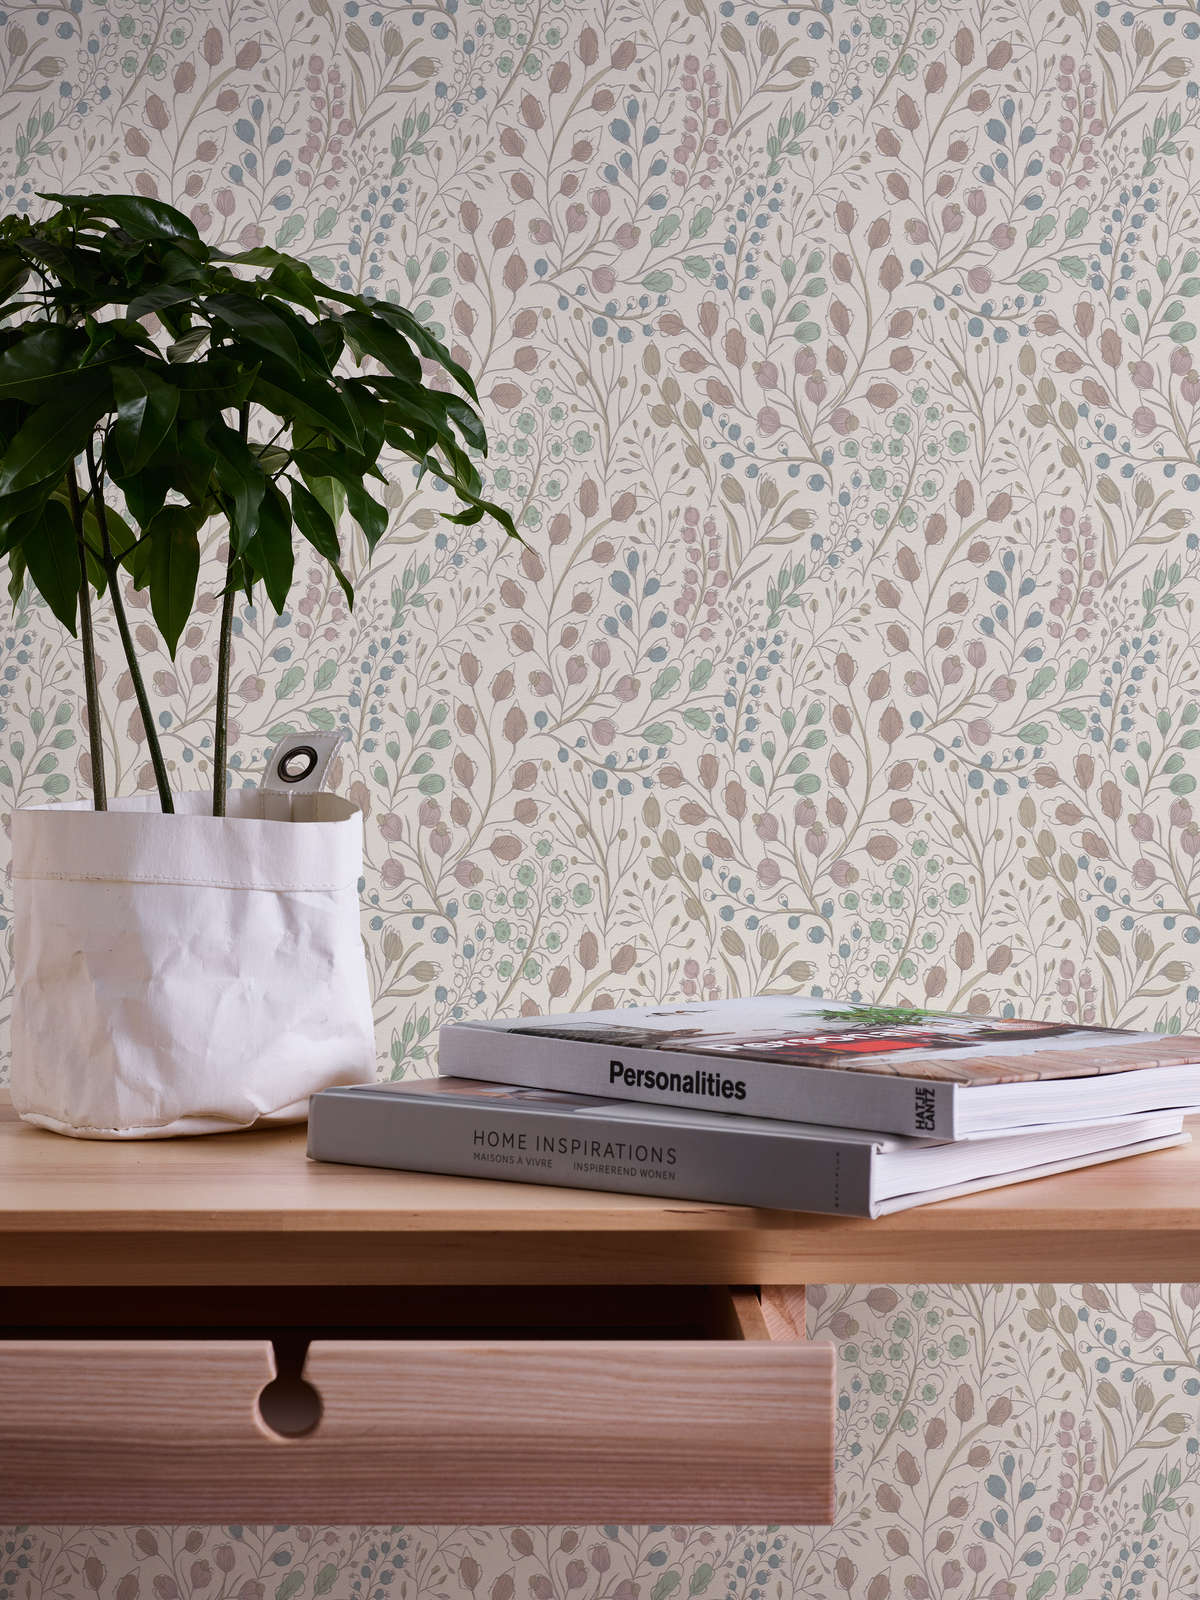             Floral non-woven wallpaper in sign style - white, pink, green
        